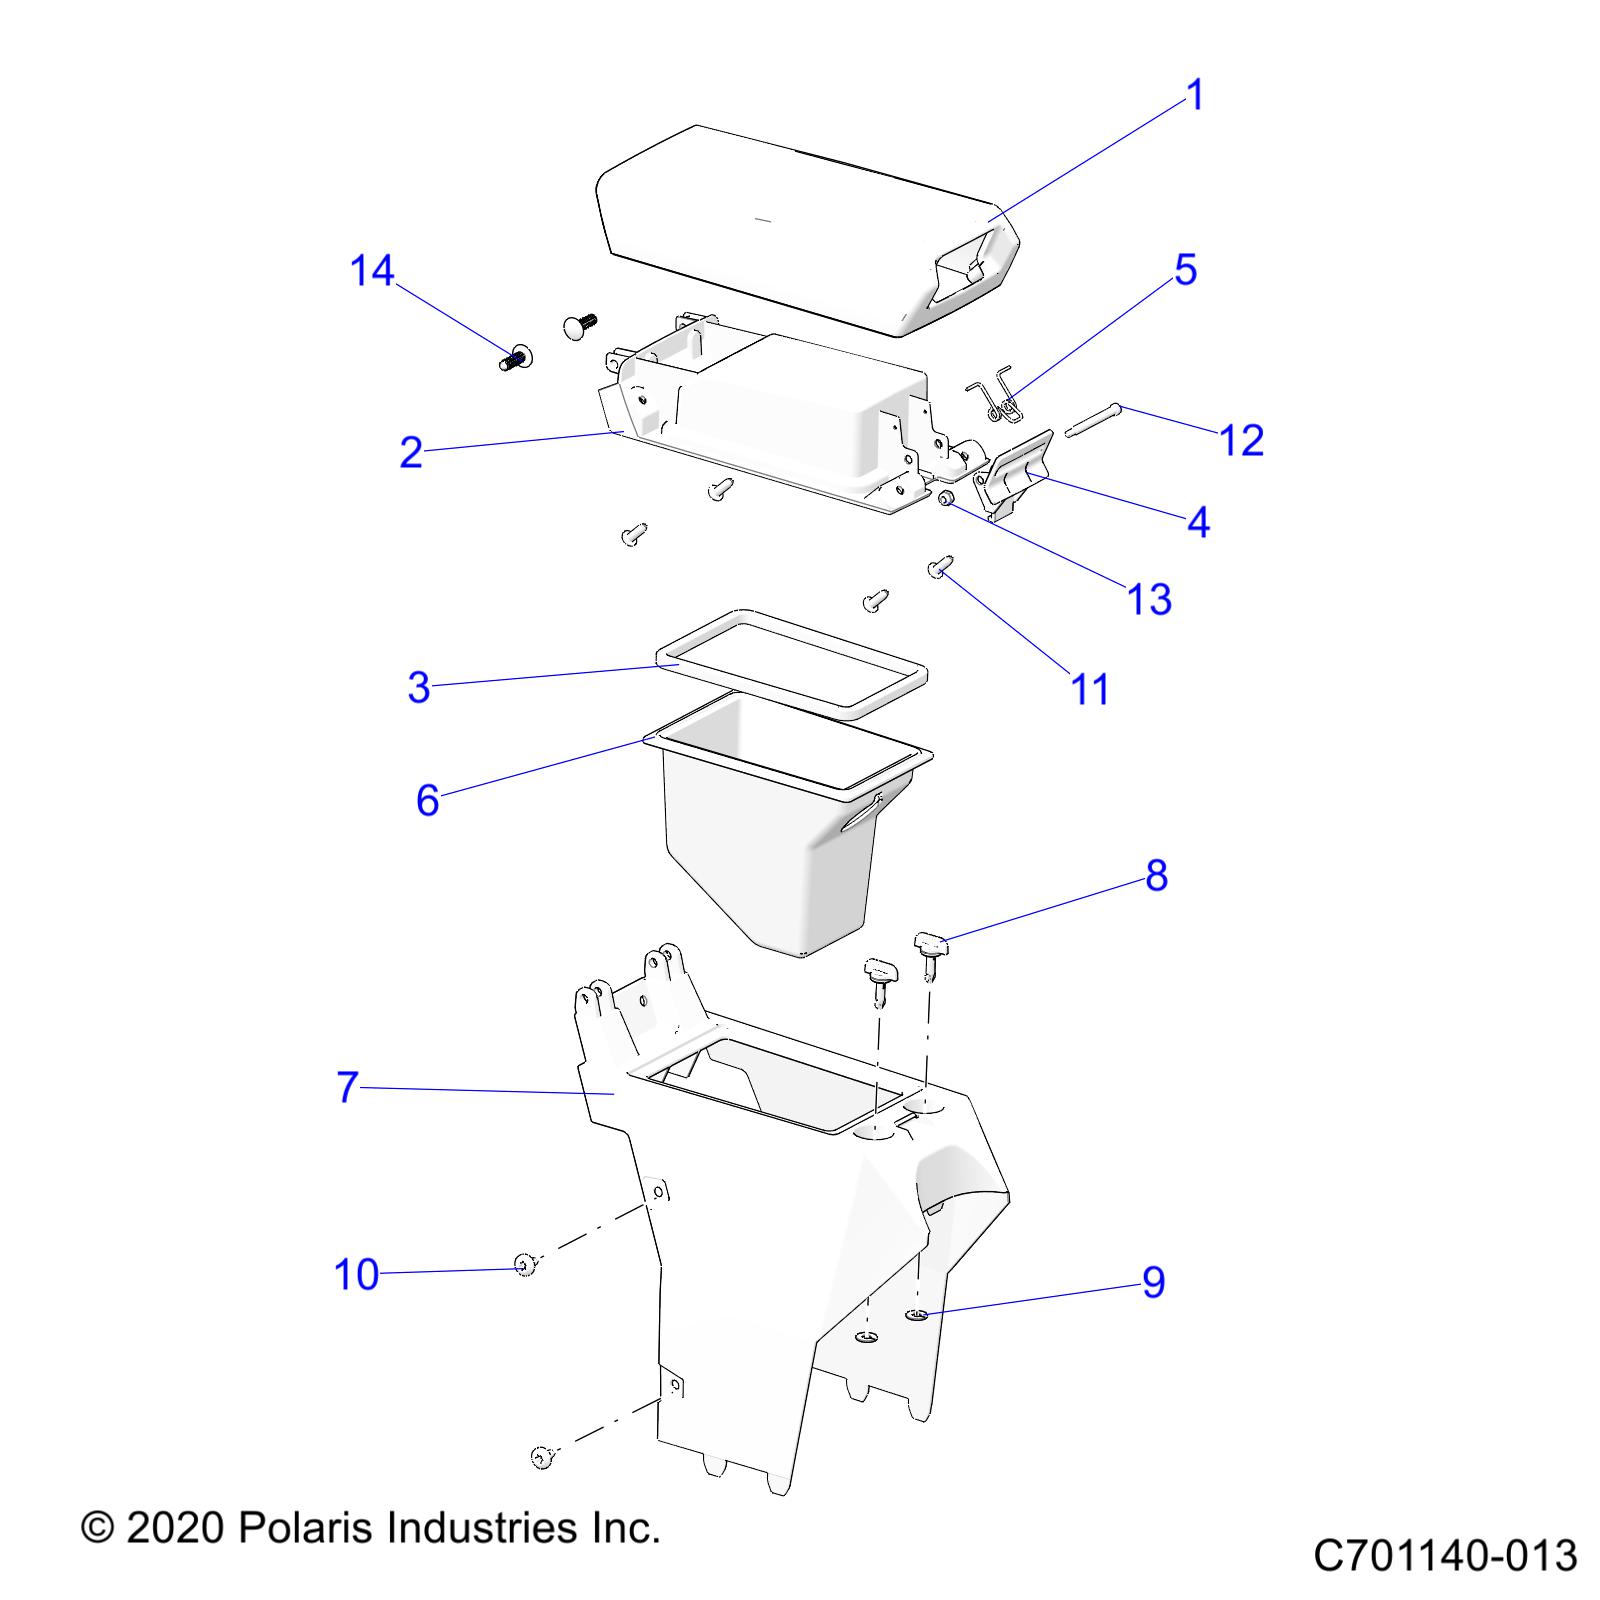 Part Number : 7045213 SPRING-LATCH CONSOLE STORAGE